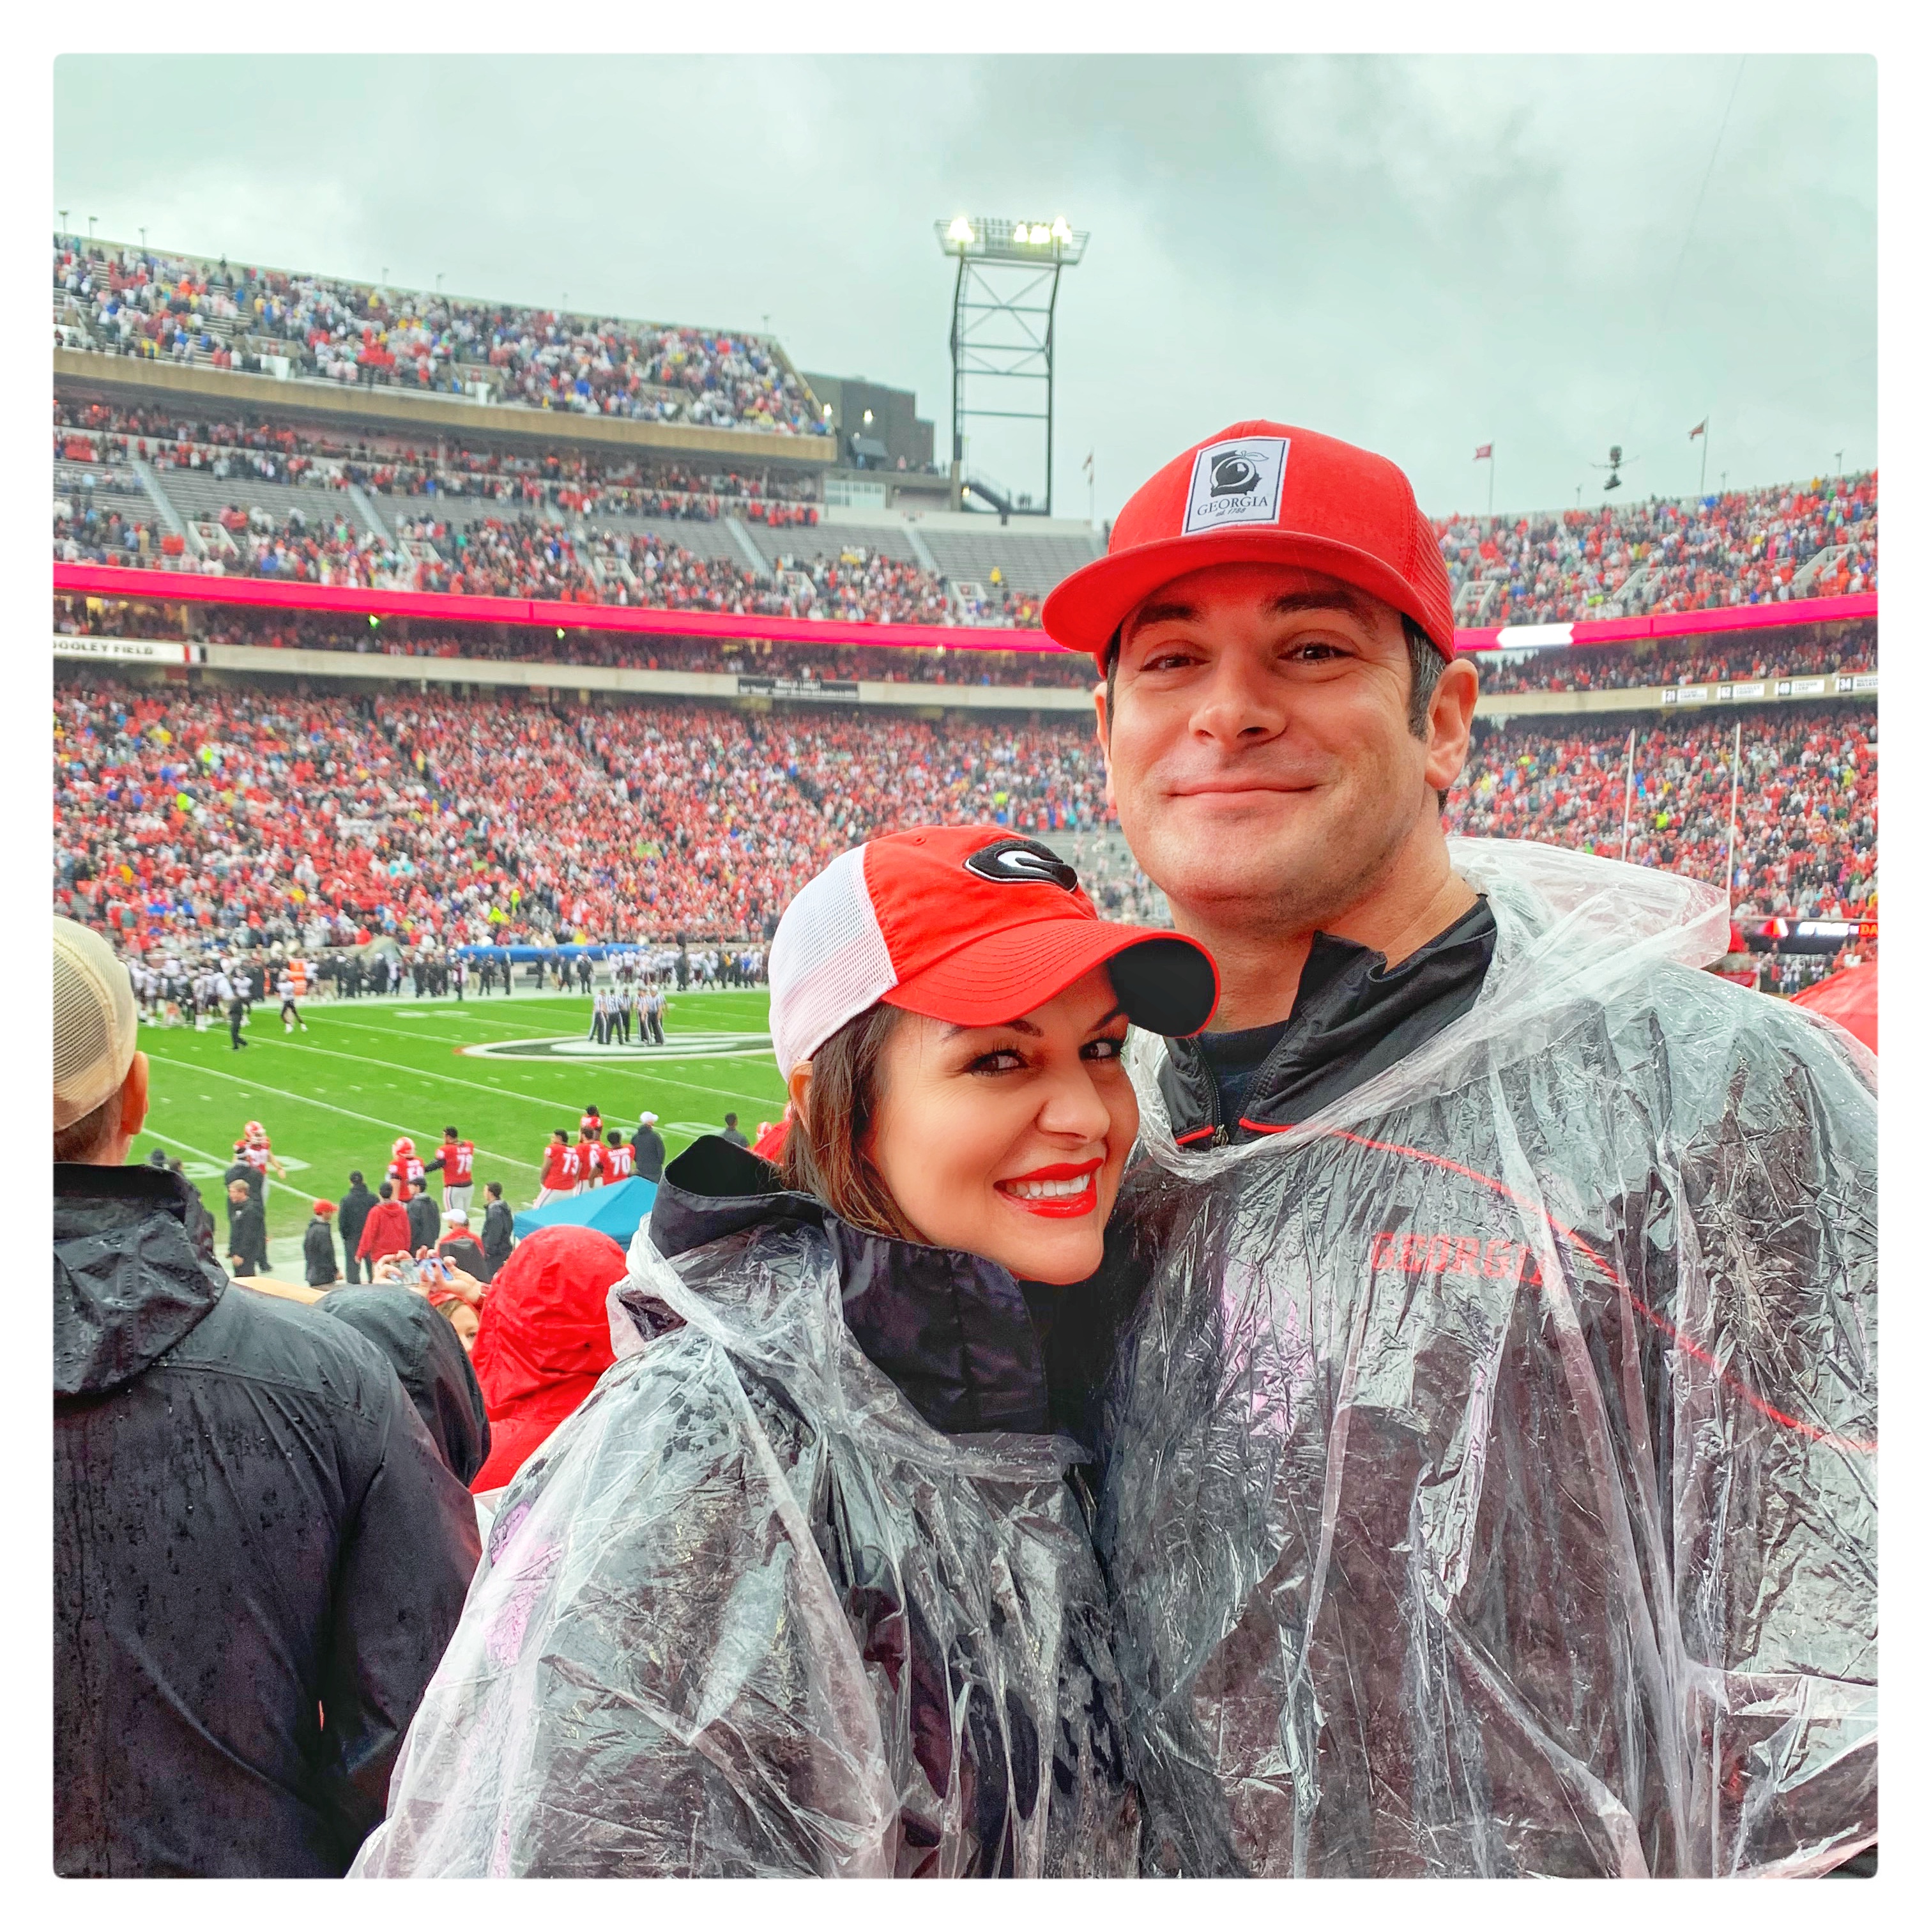 Stephanie with a friend at a UGA football game